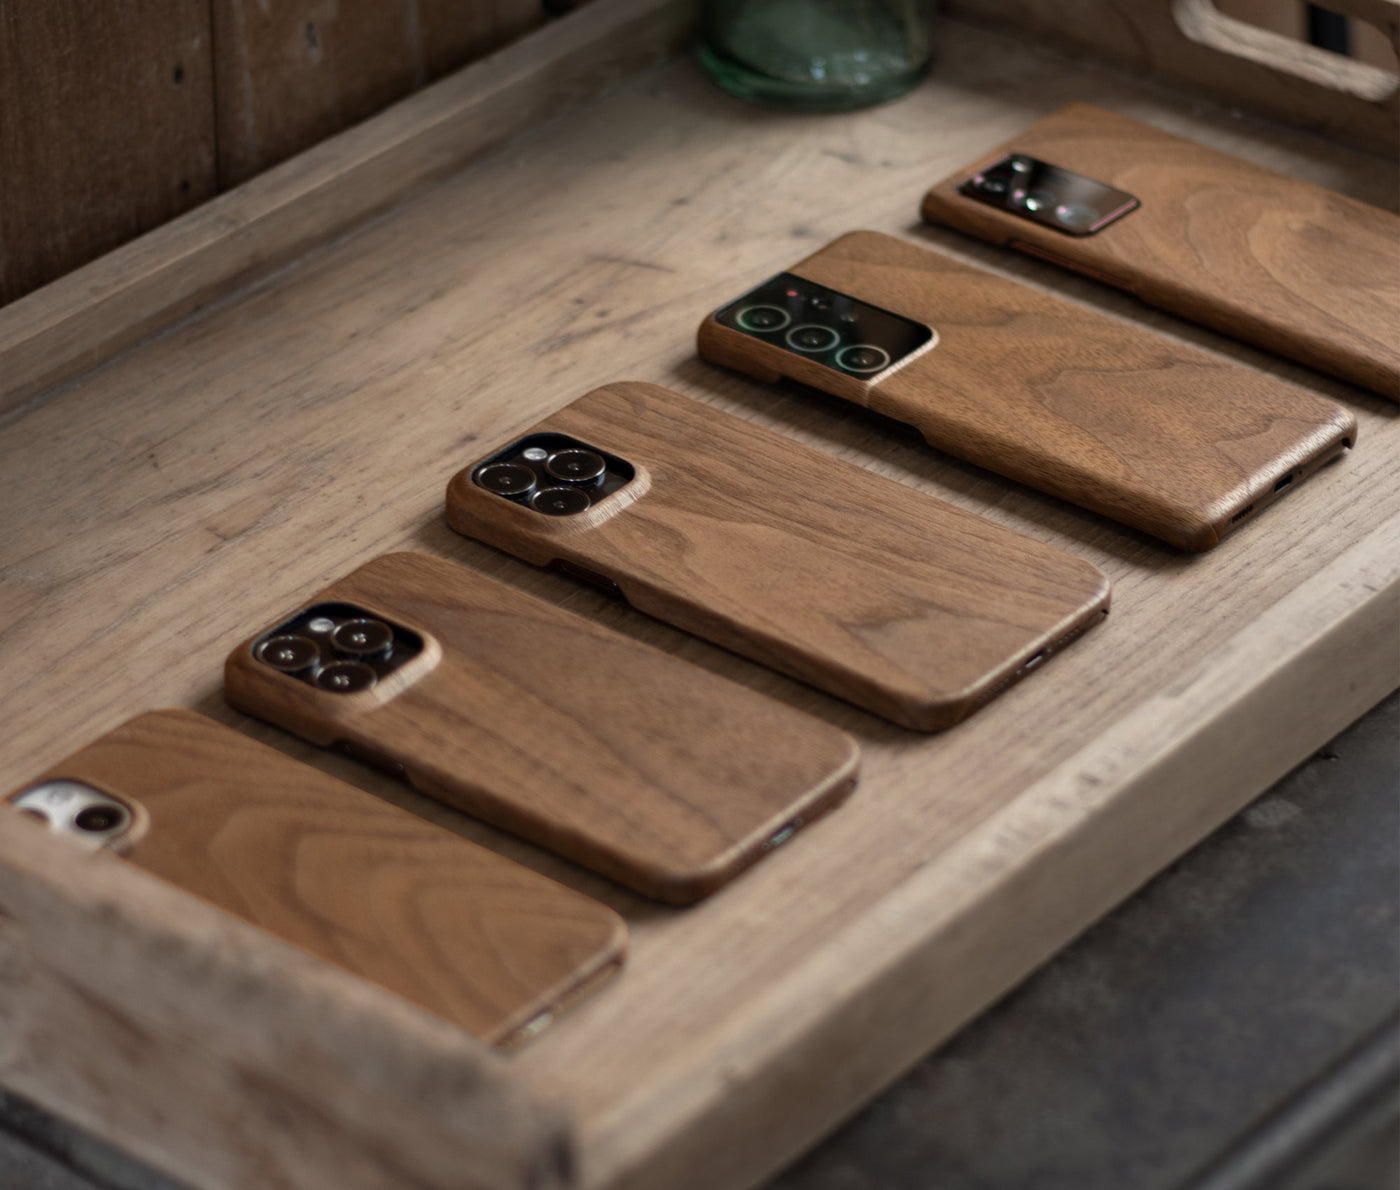 Wooden Case  for iPhone